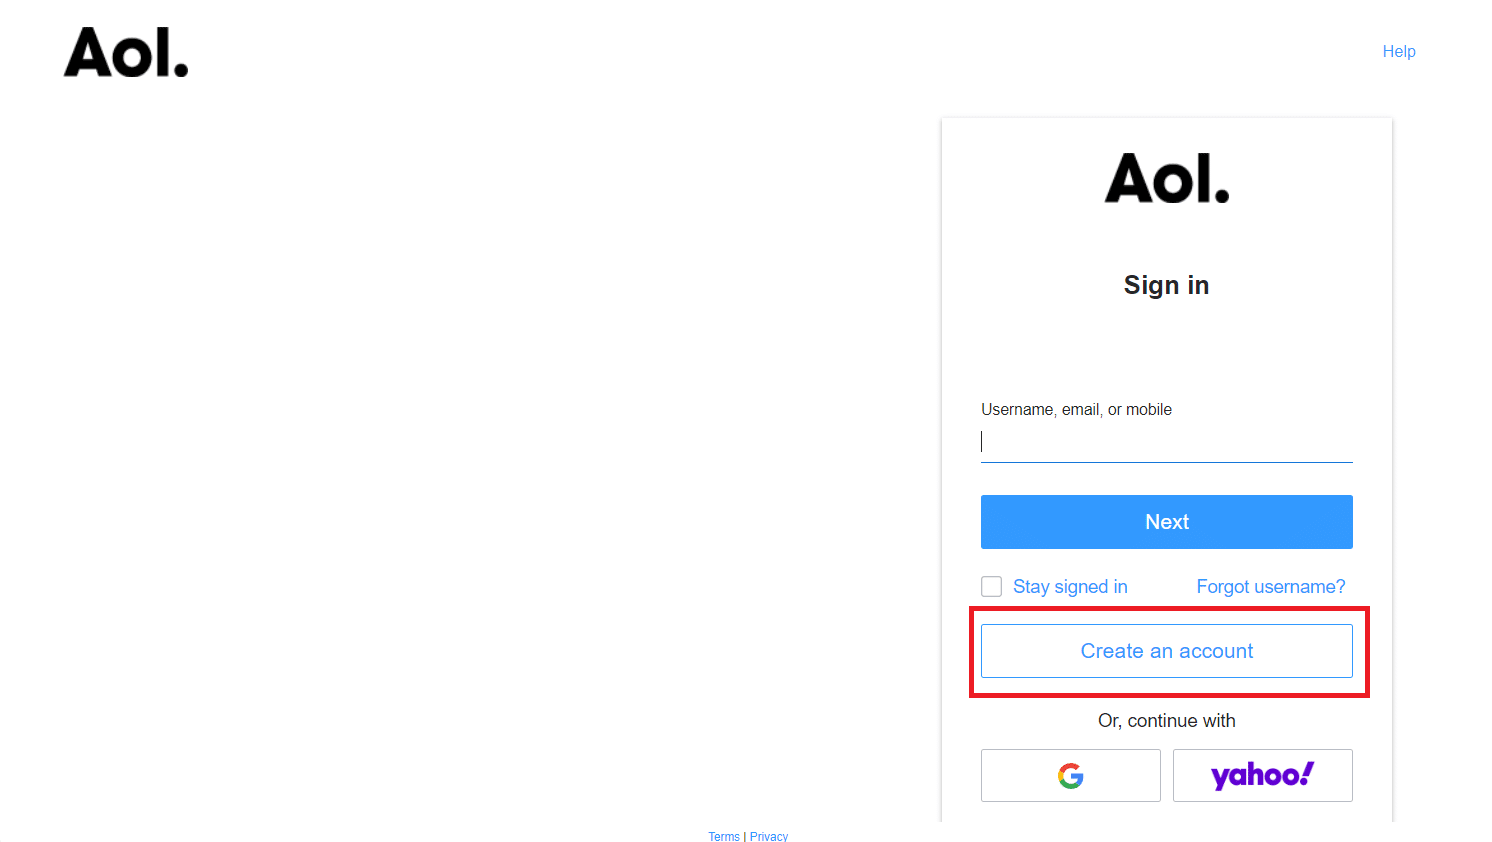 By selecting the Create a new account option, you may create a new account